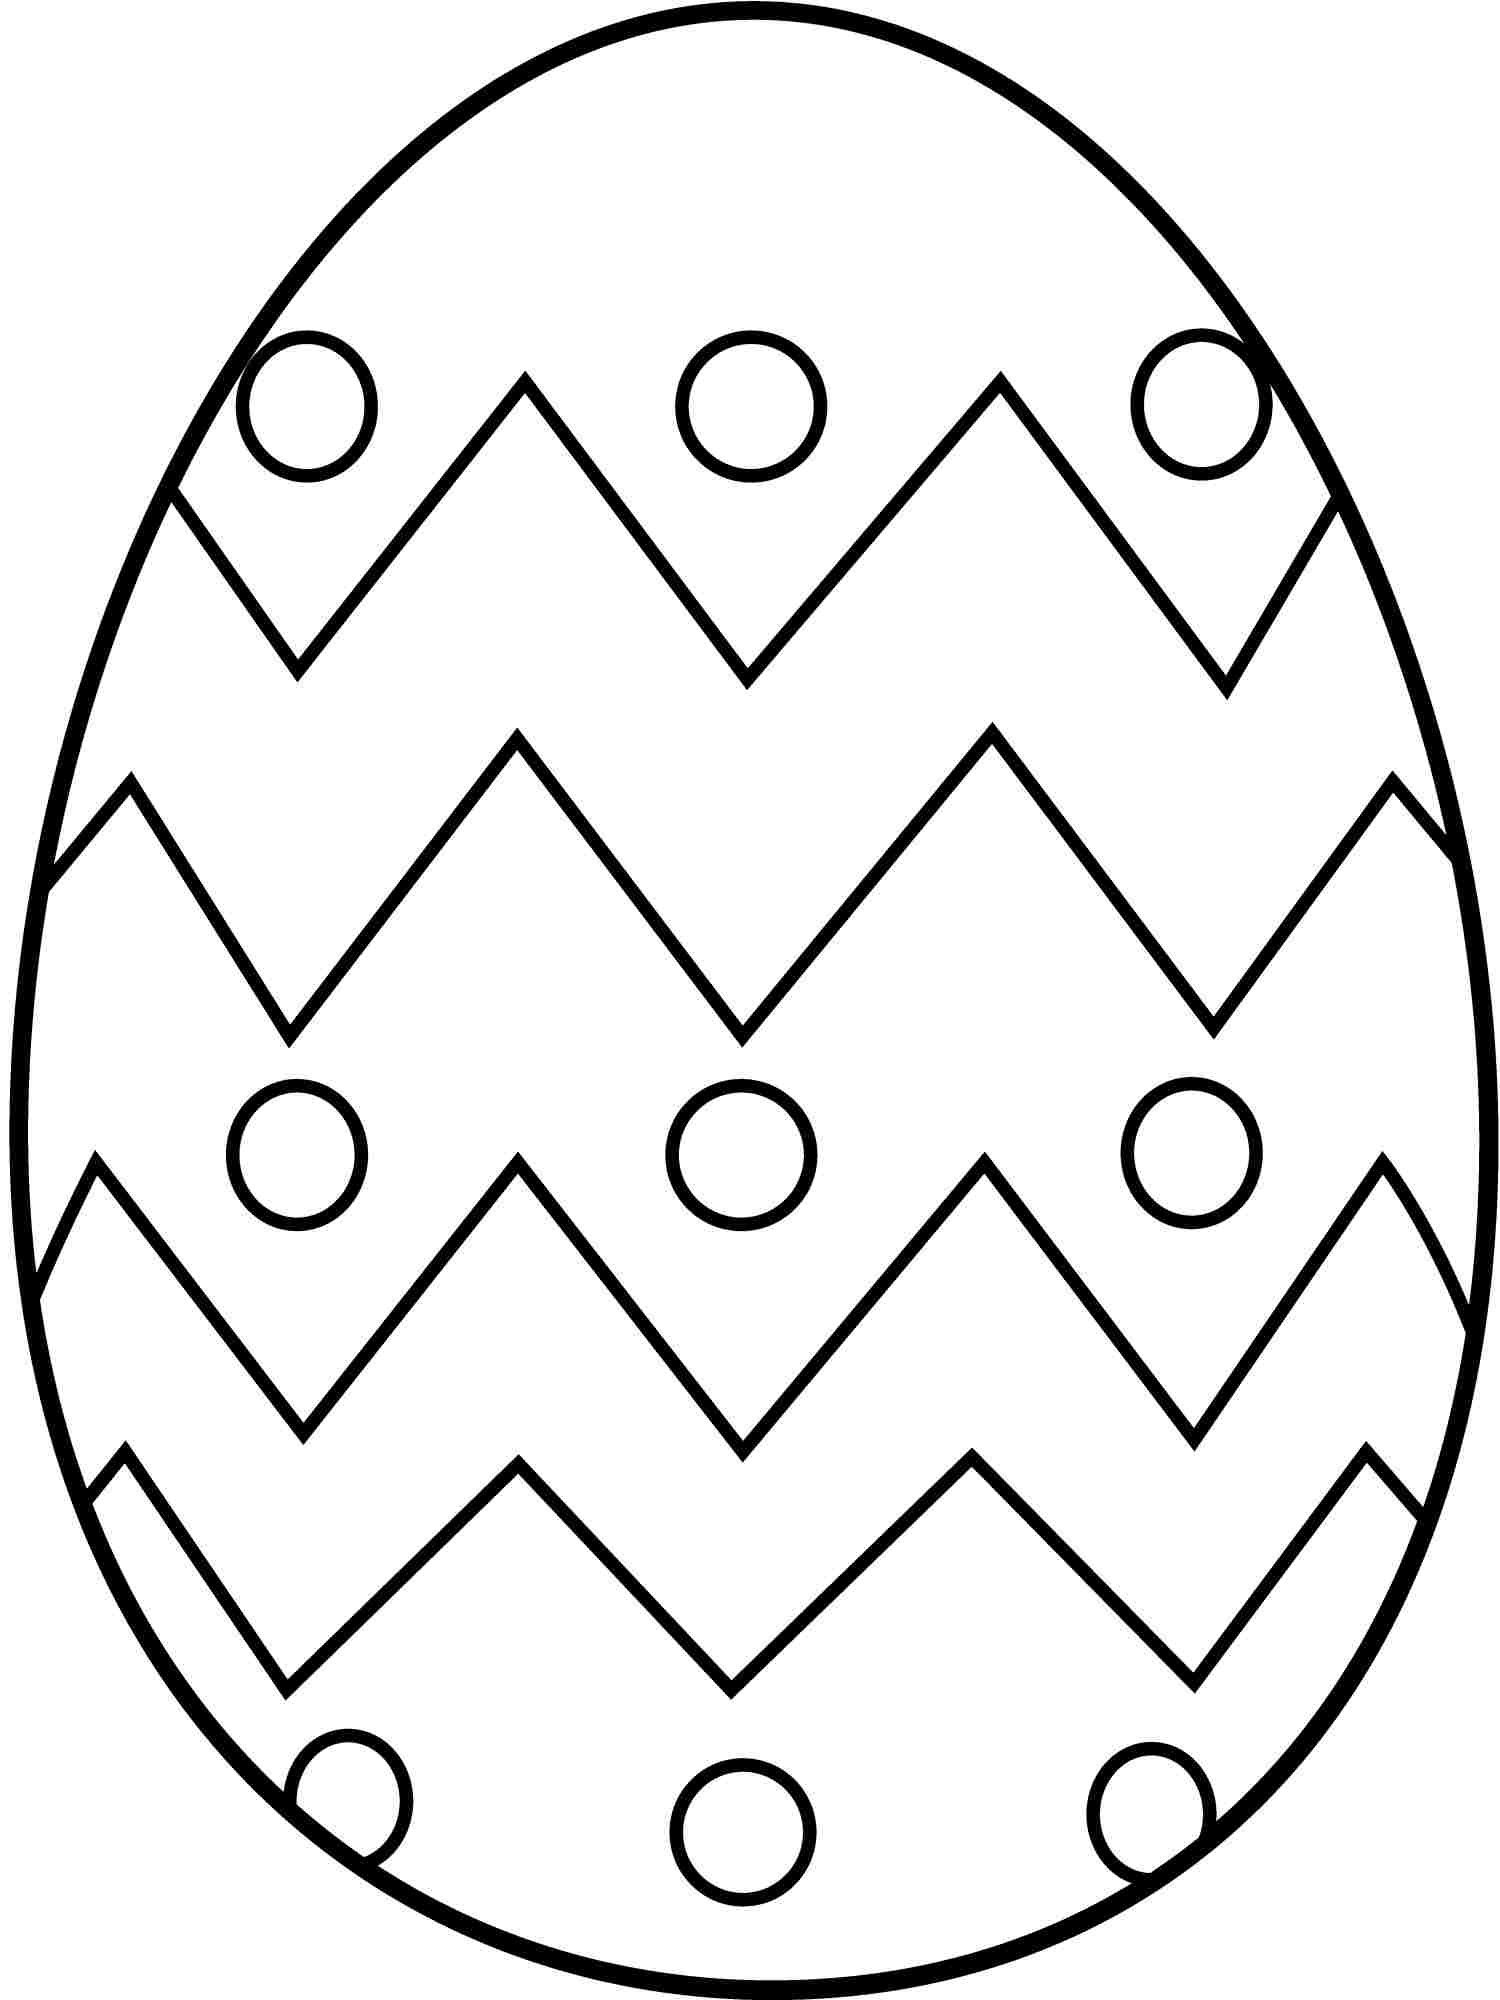 Coloring Pages About Easter - Coloring Pages For All Ages